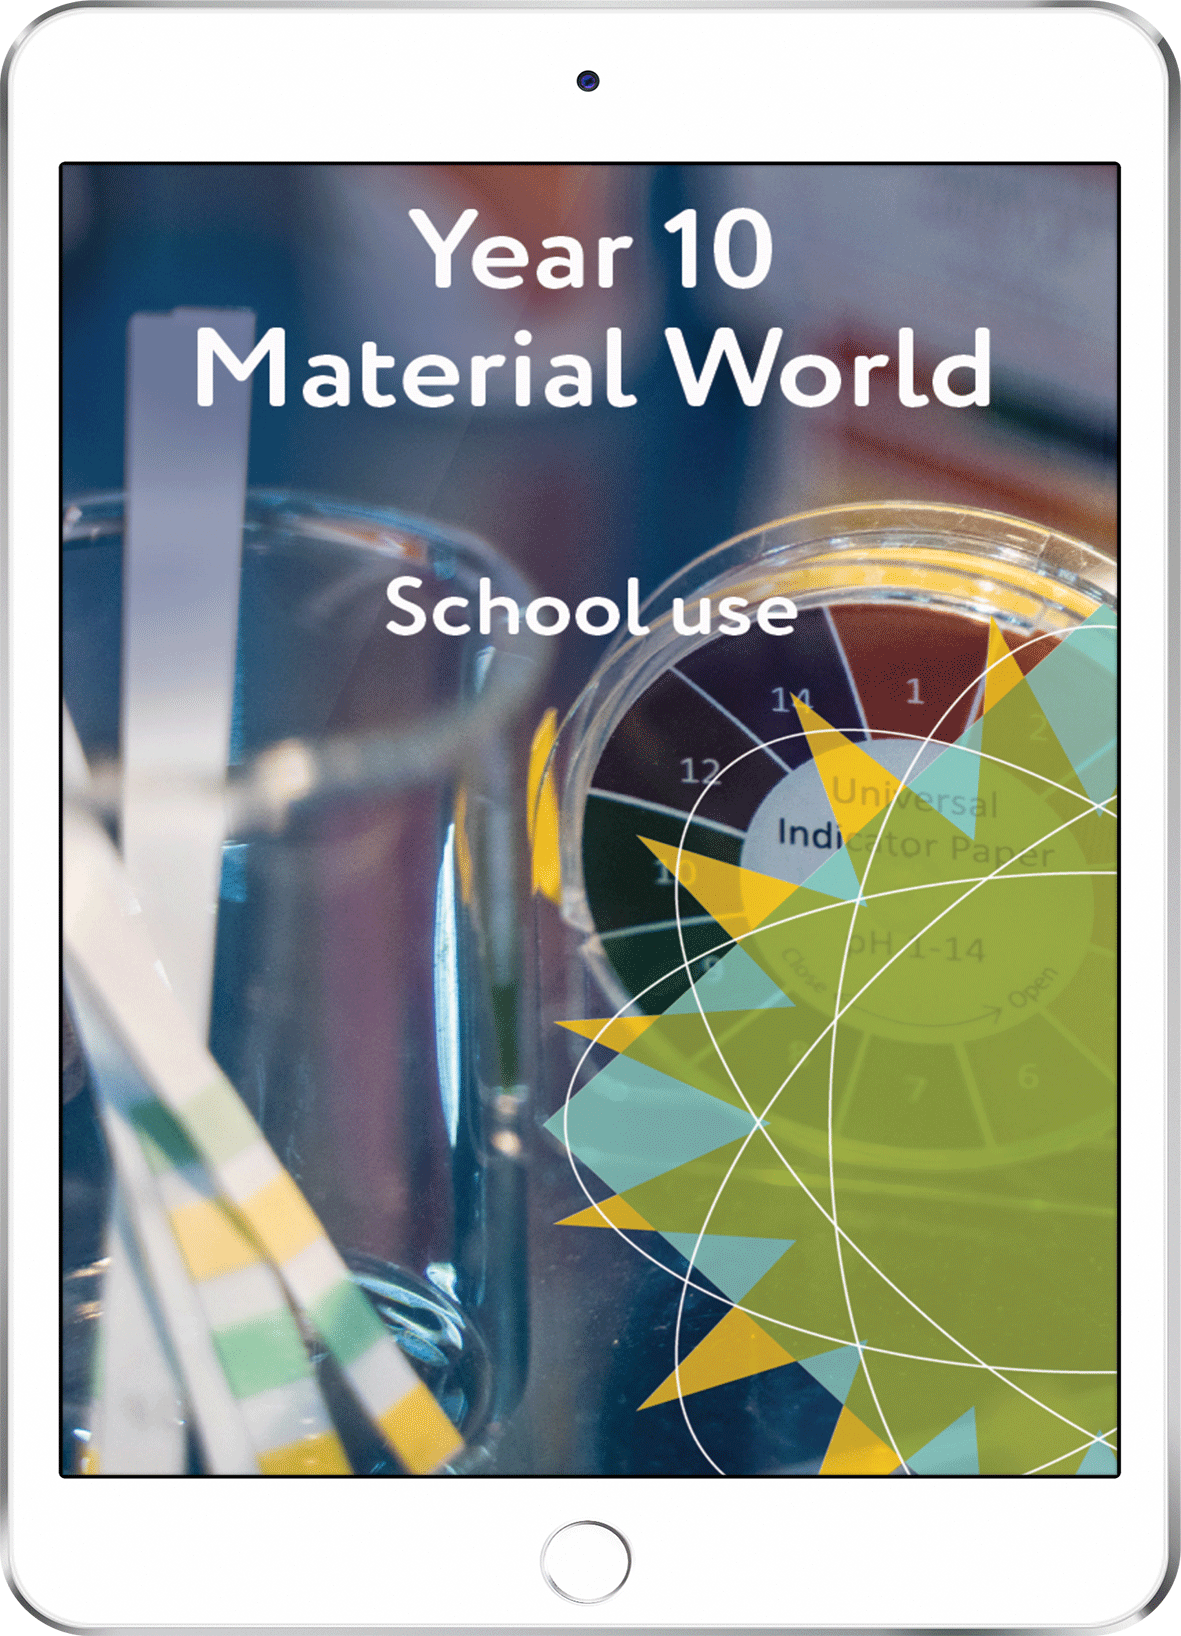 Year 10 Material World - School Use